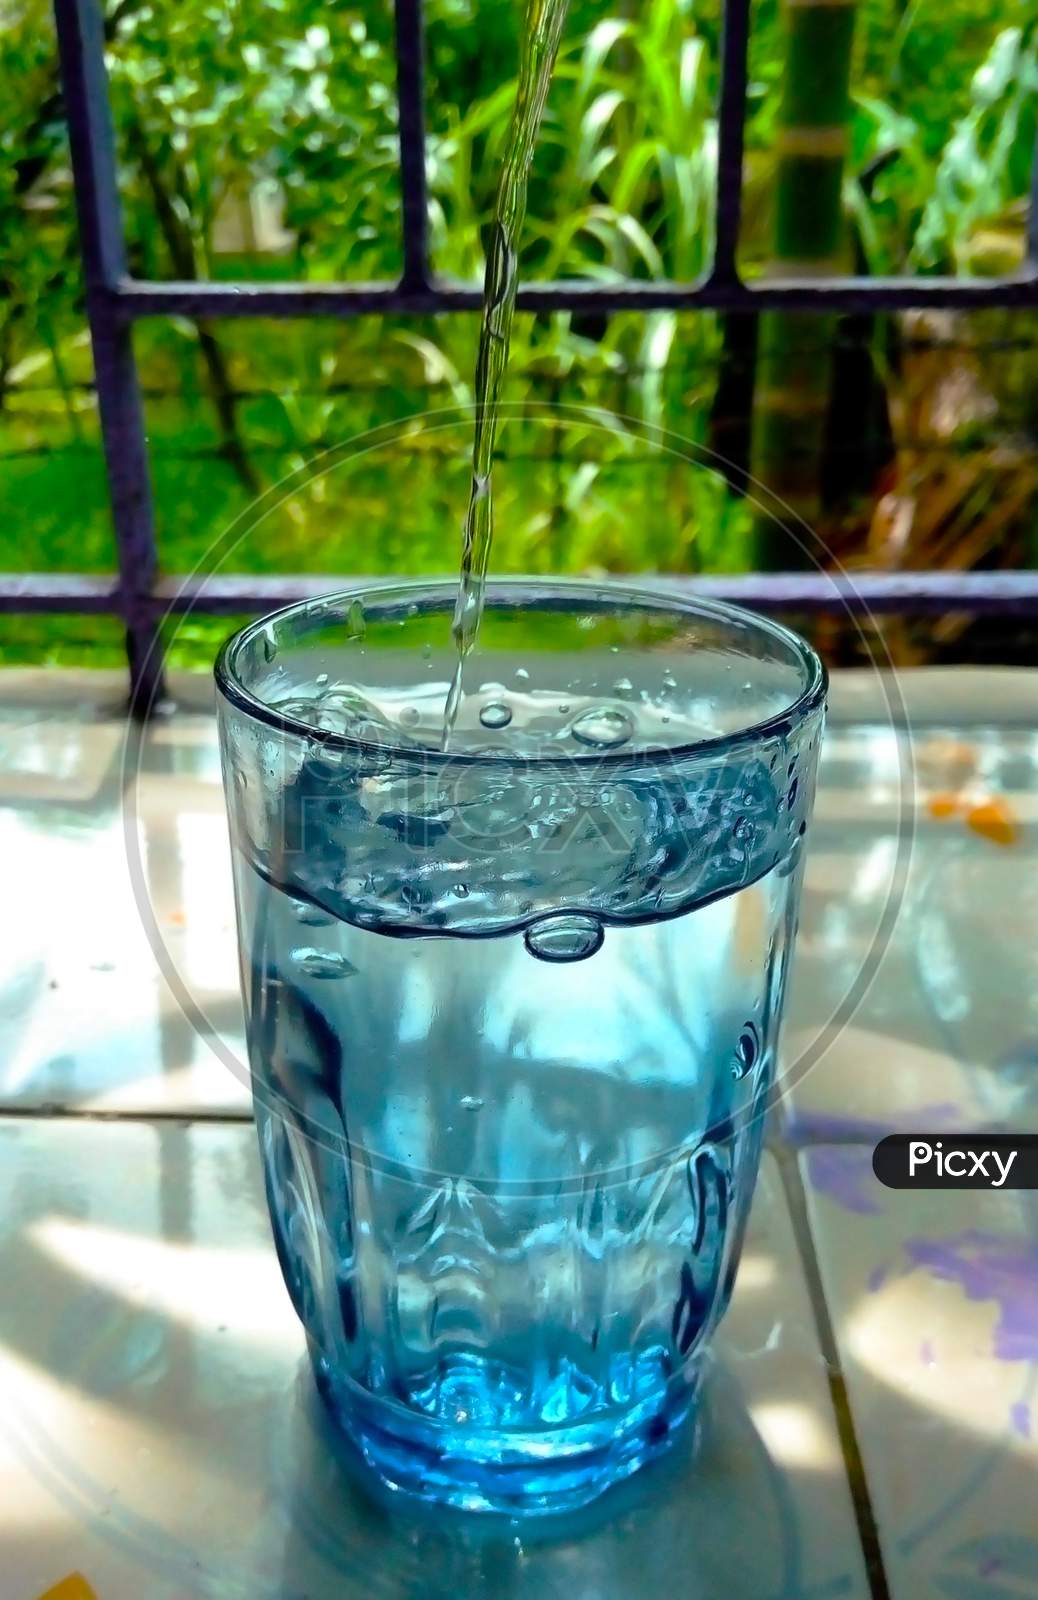 The Glass Is Being Filled By Drinking Water